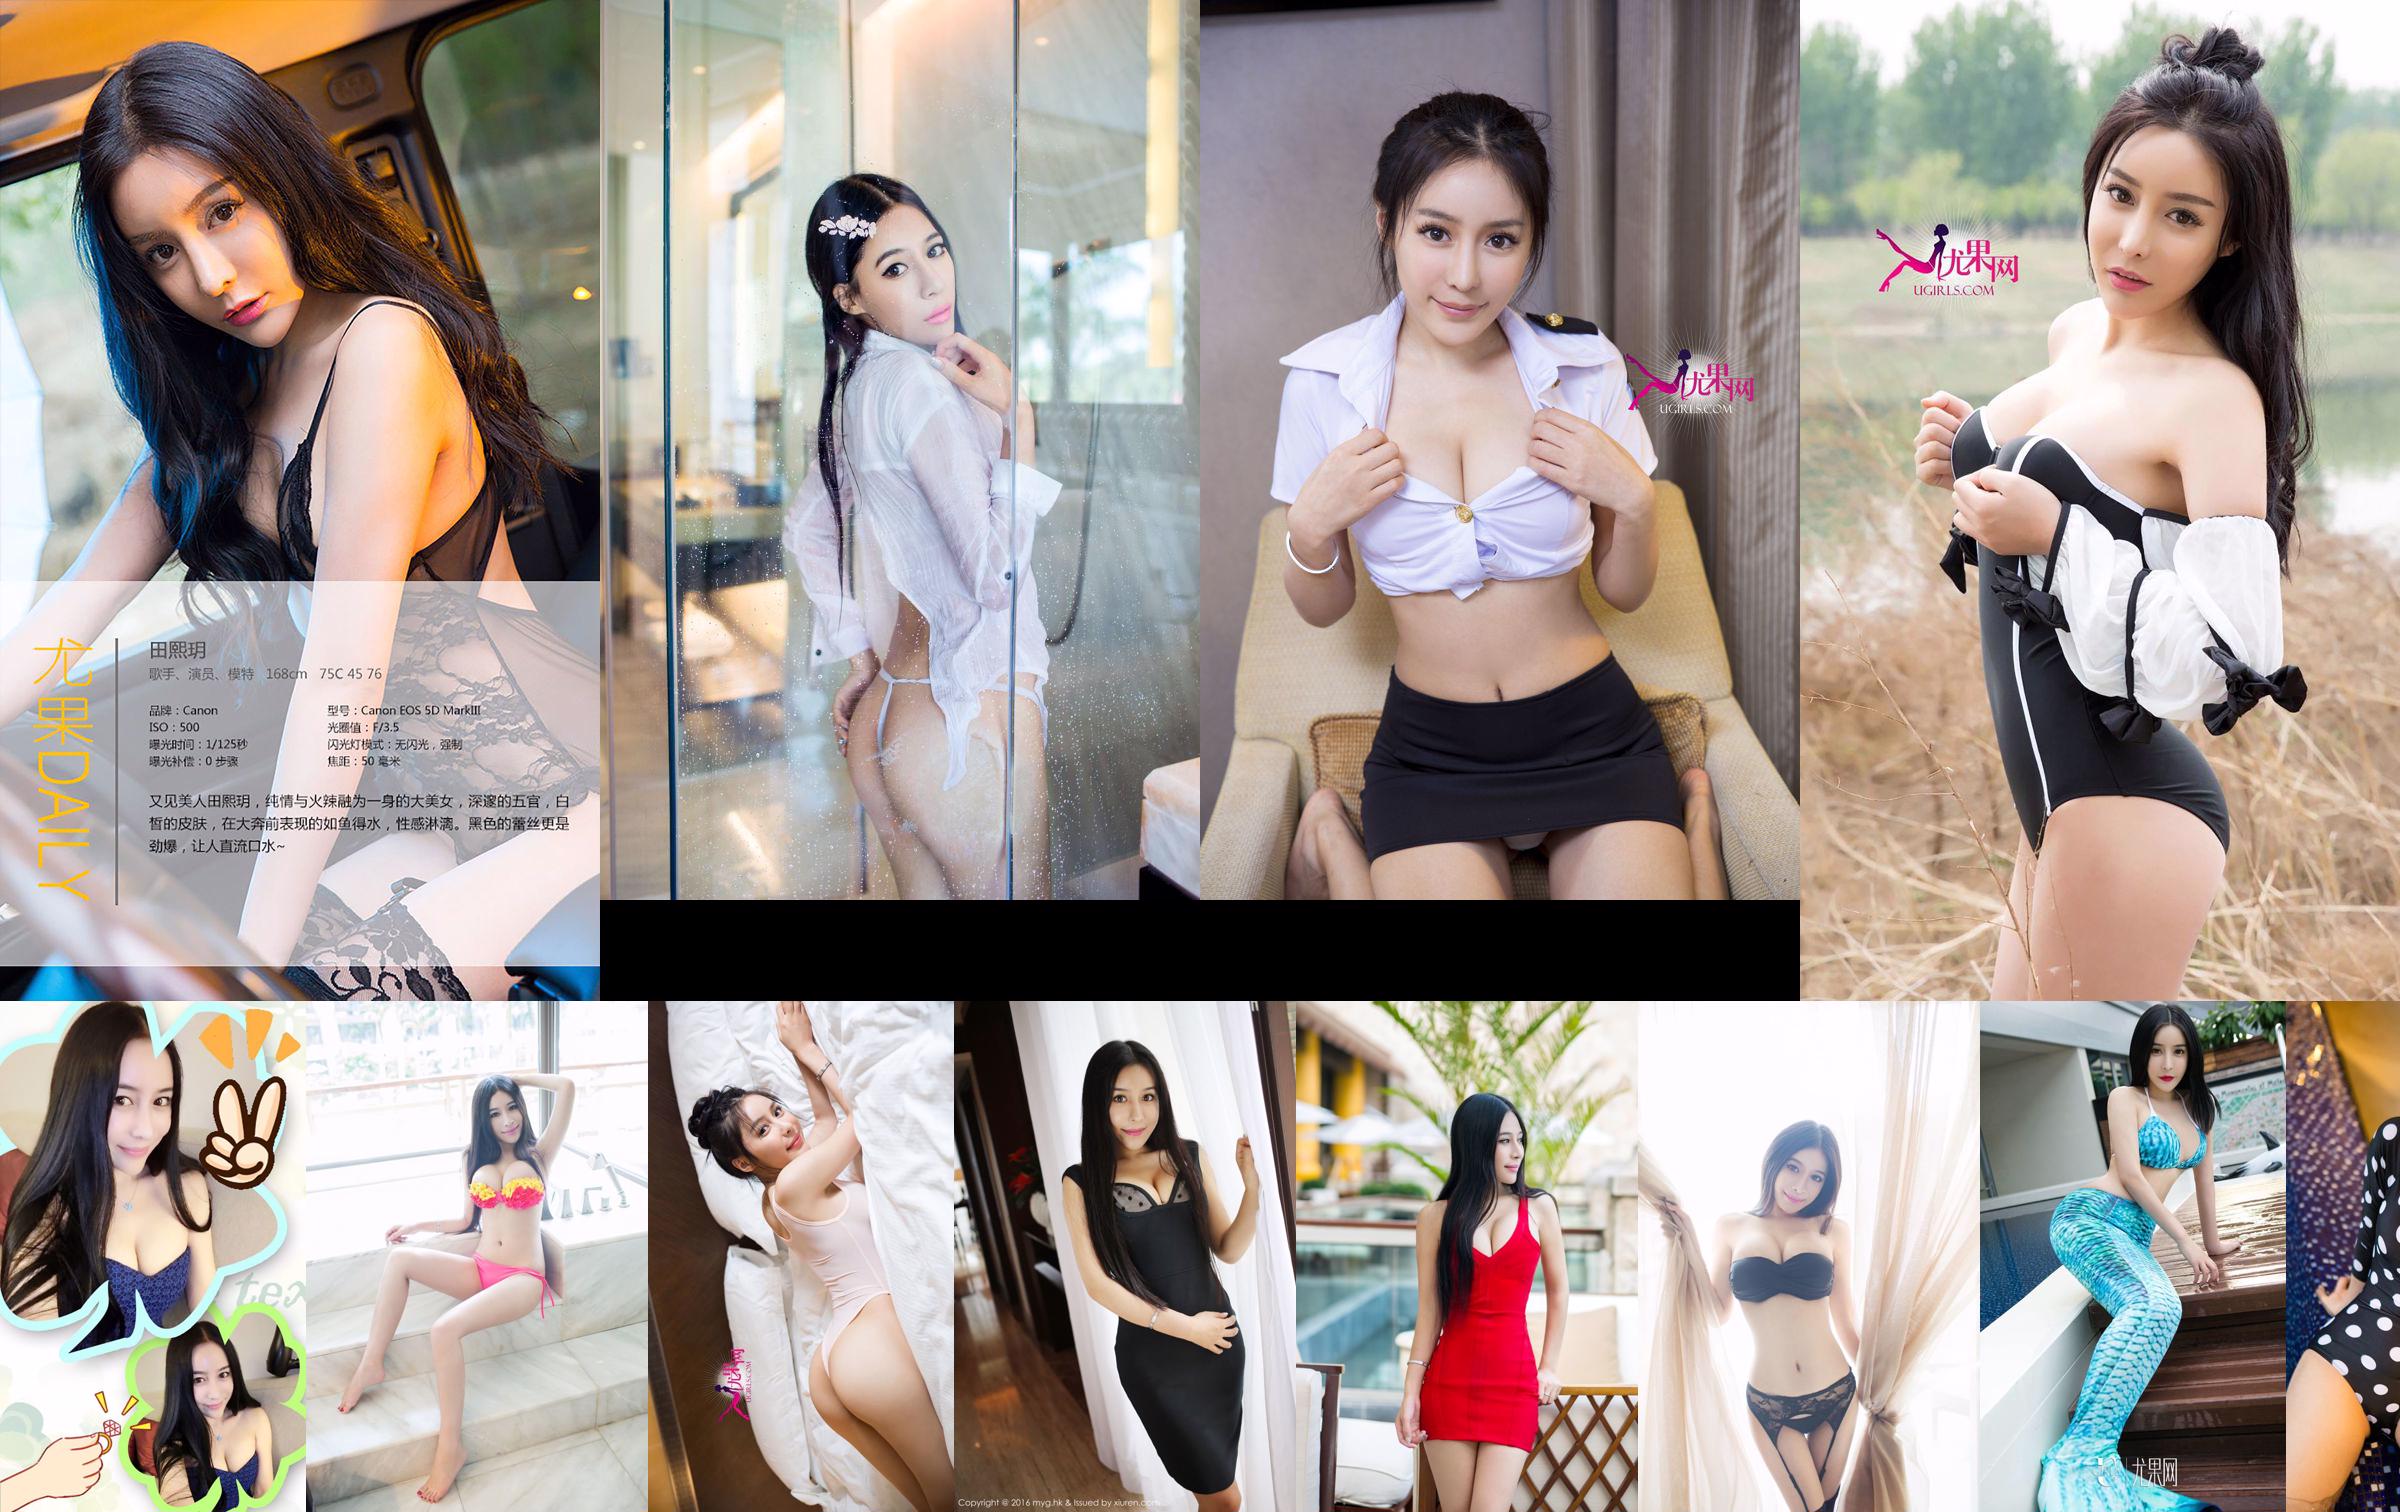 Tian Xinna Angel "Sexy beautiful buttocks, exquisite looks, perfect figure S-curve" [美媛馆MyGirl] Vol.190 No.085988 Page 1